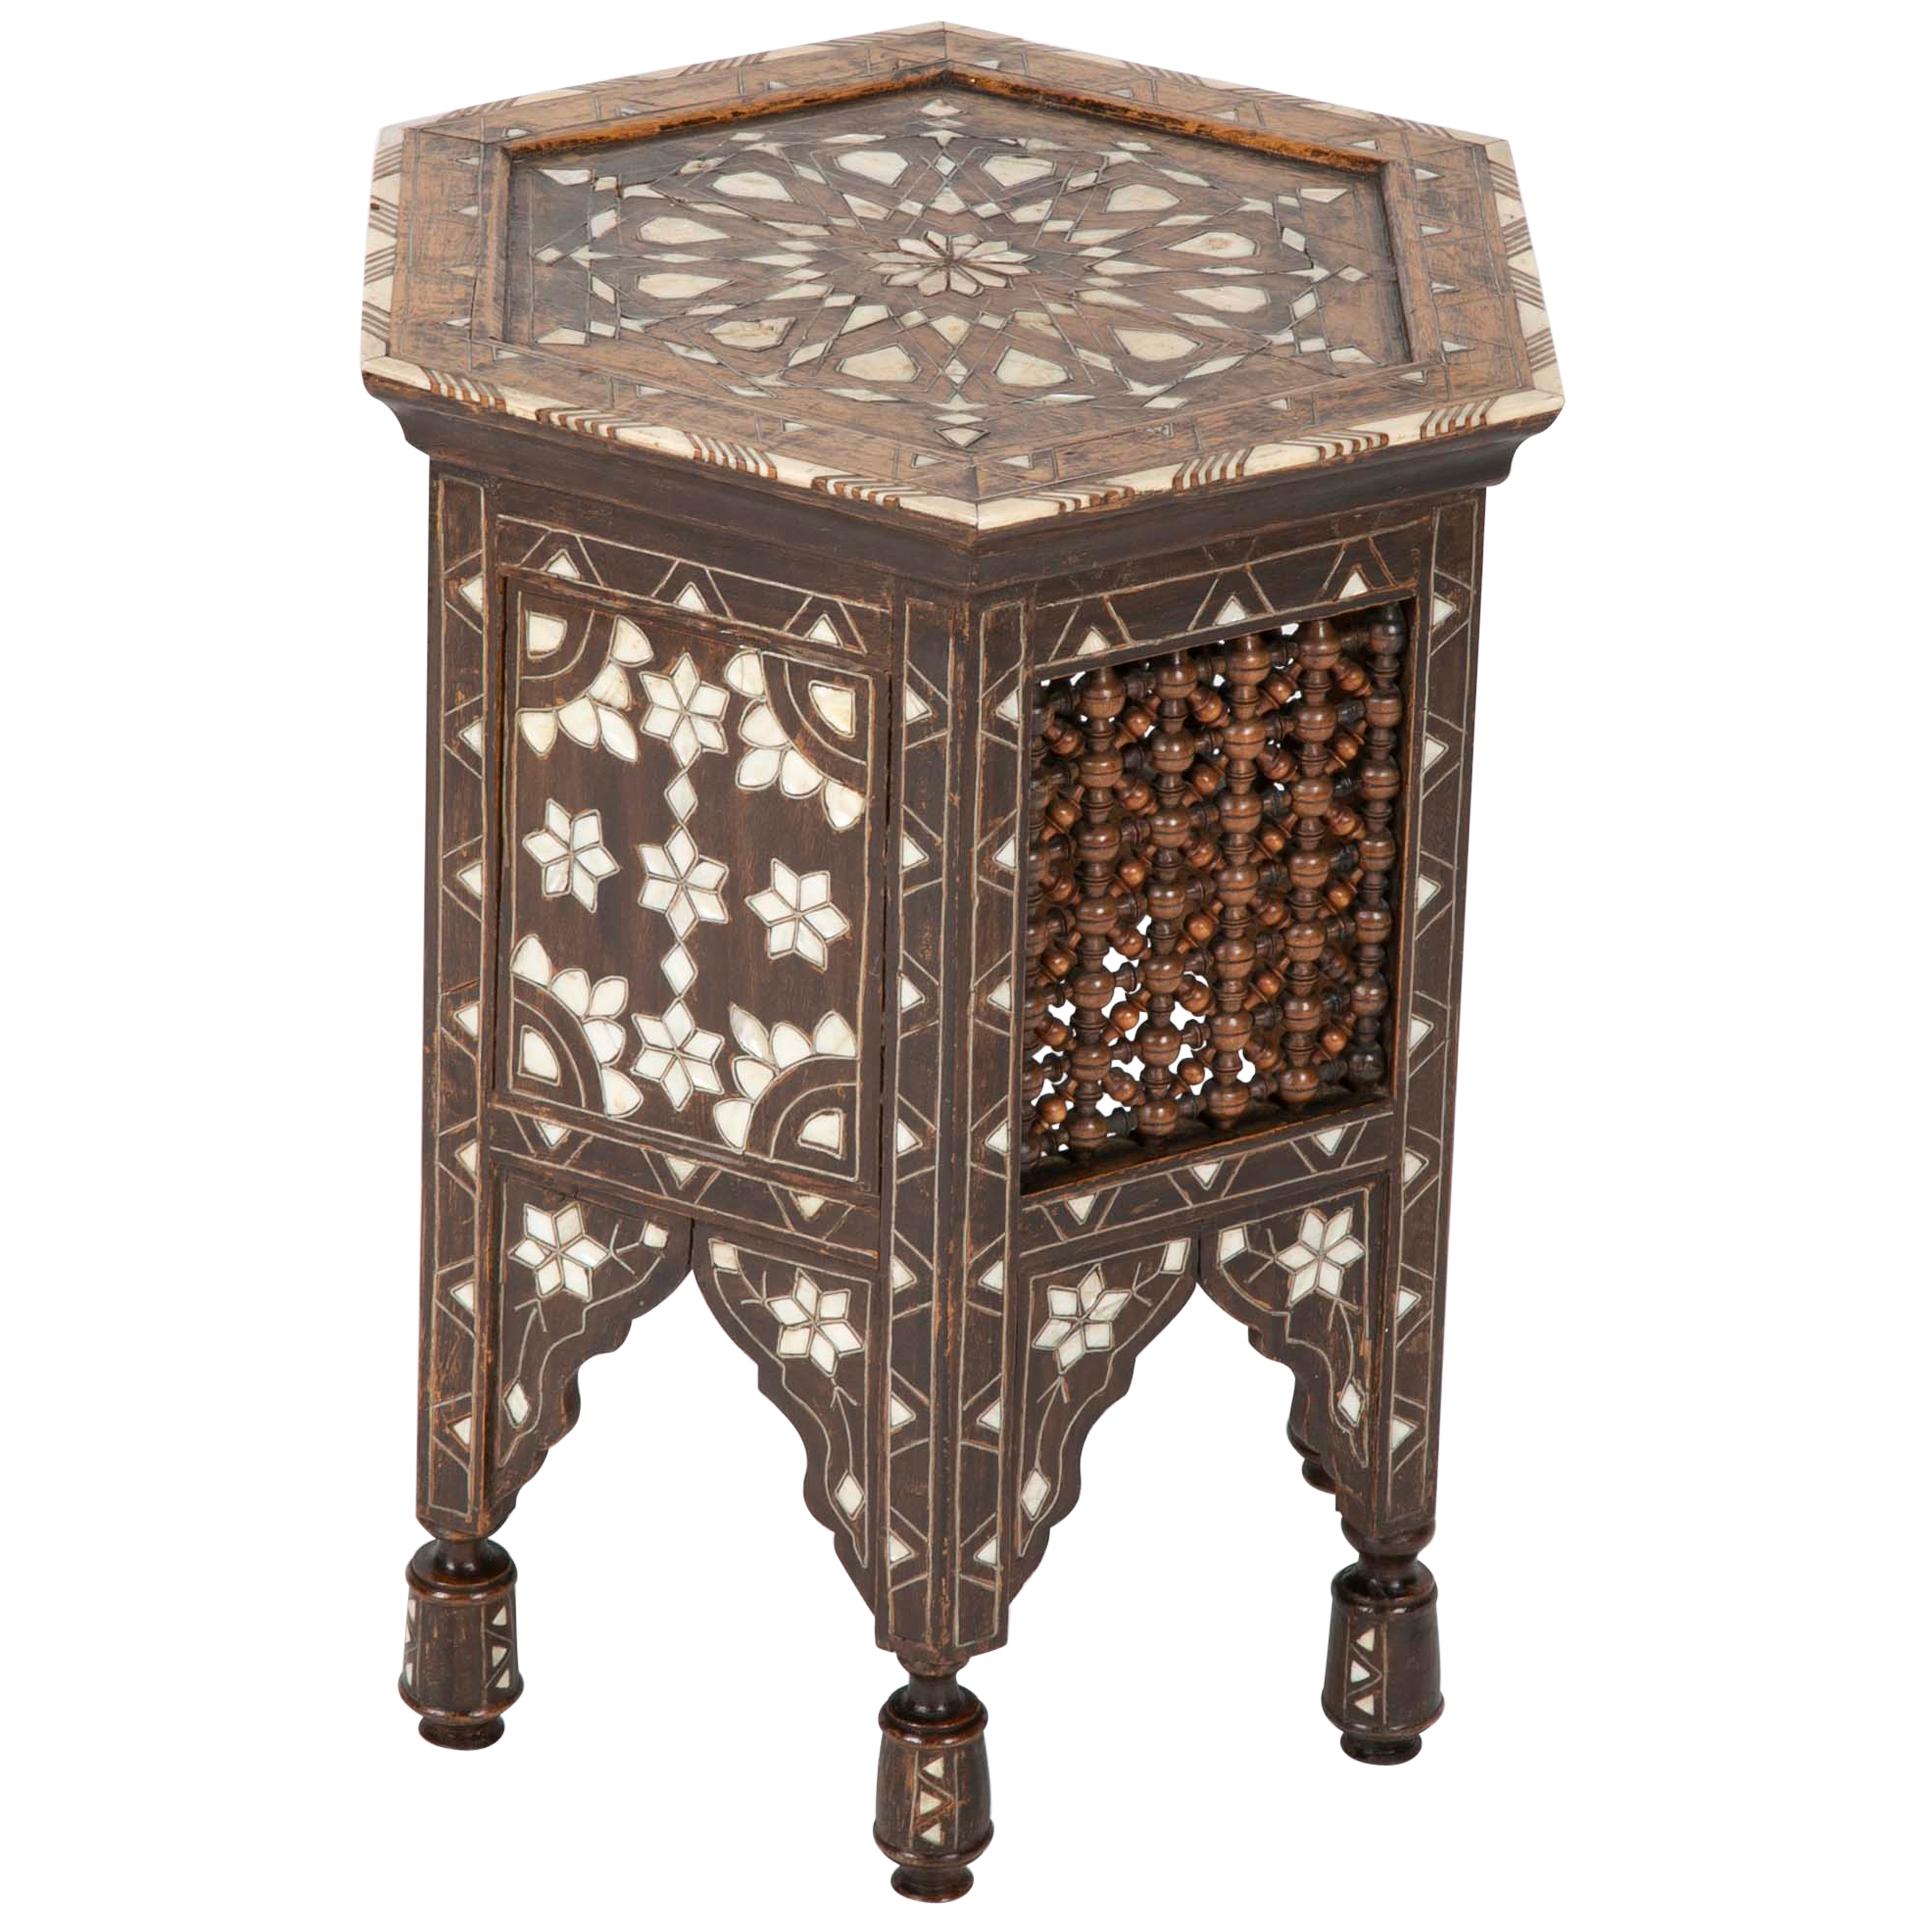 Ottoman Mother-of-Pearl and Bone Inlaid Side Table